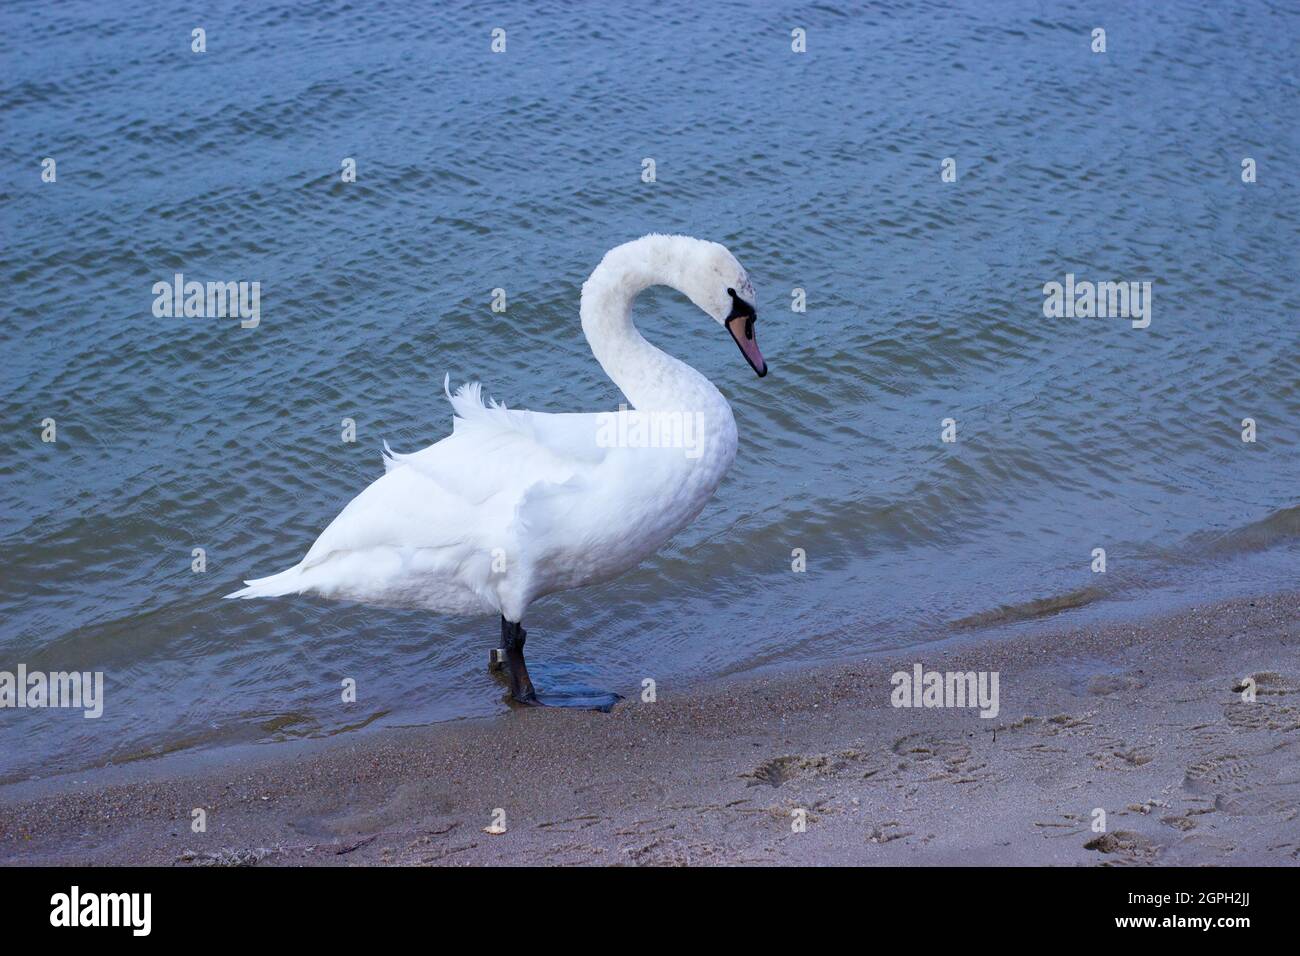 A swan disambiguation stands on the sand by the lake. The wind flutters her feathers. There are human and animal footprints in the sand. Stock Photo